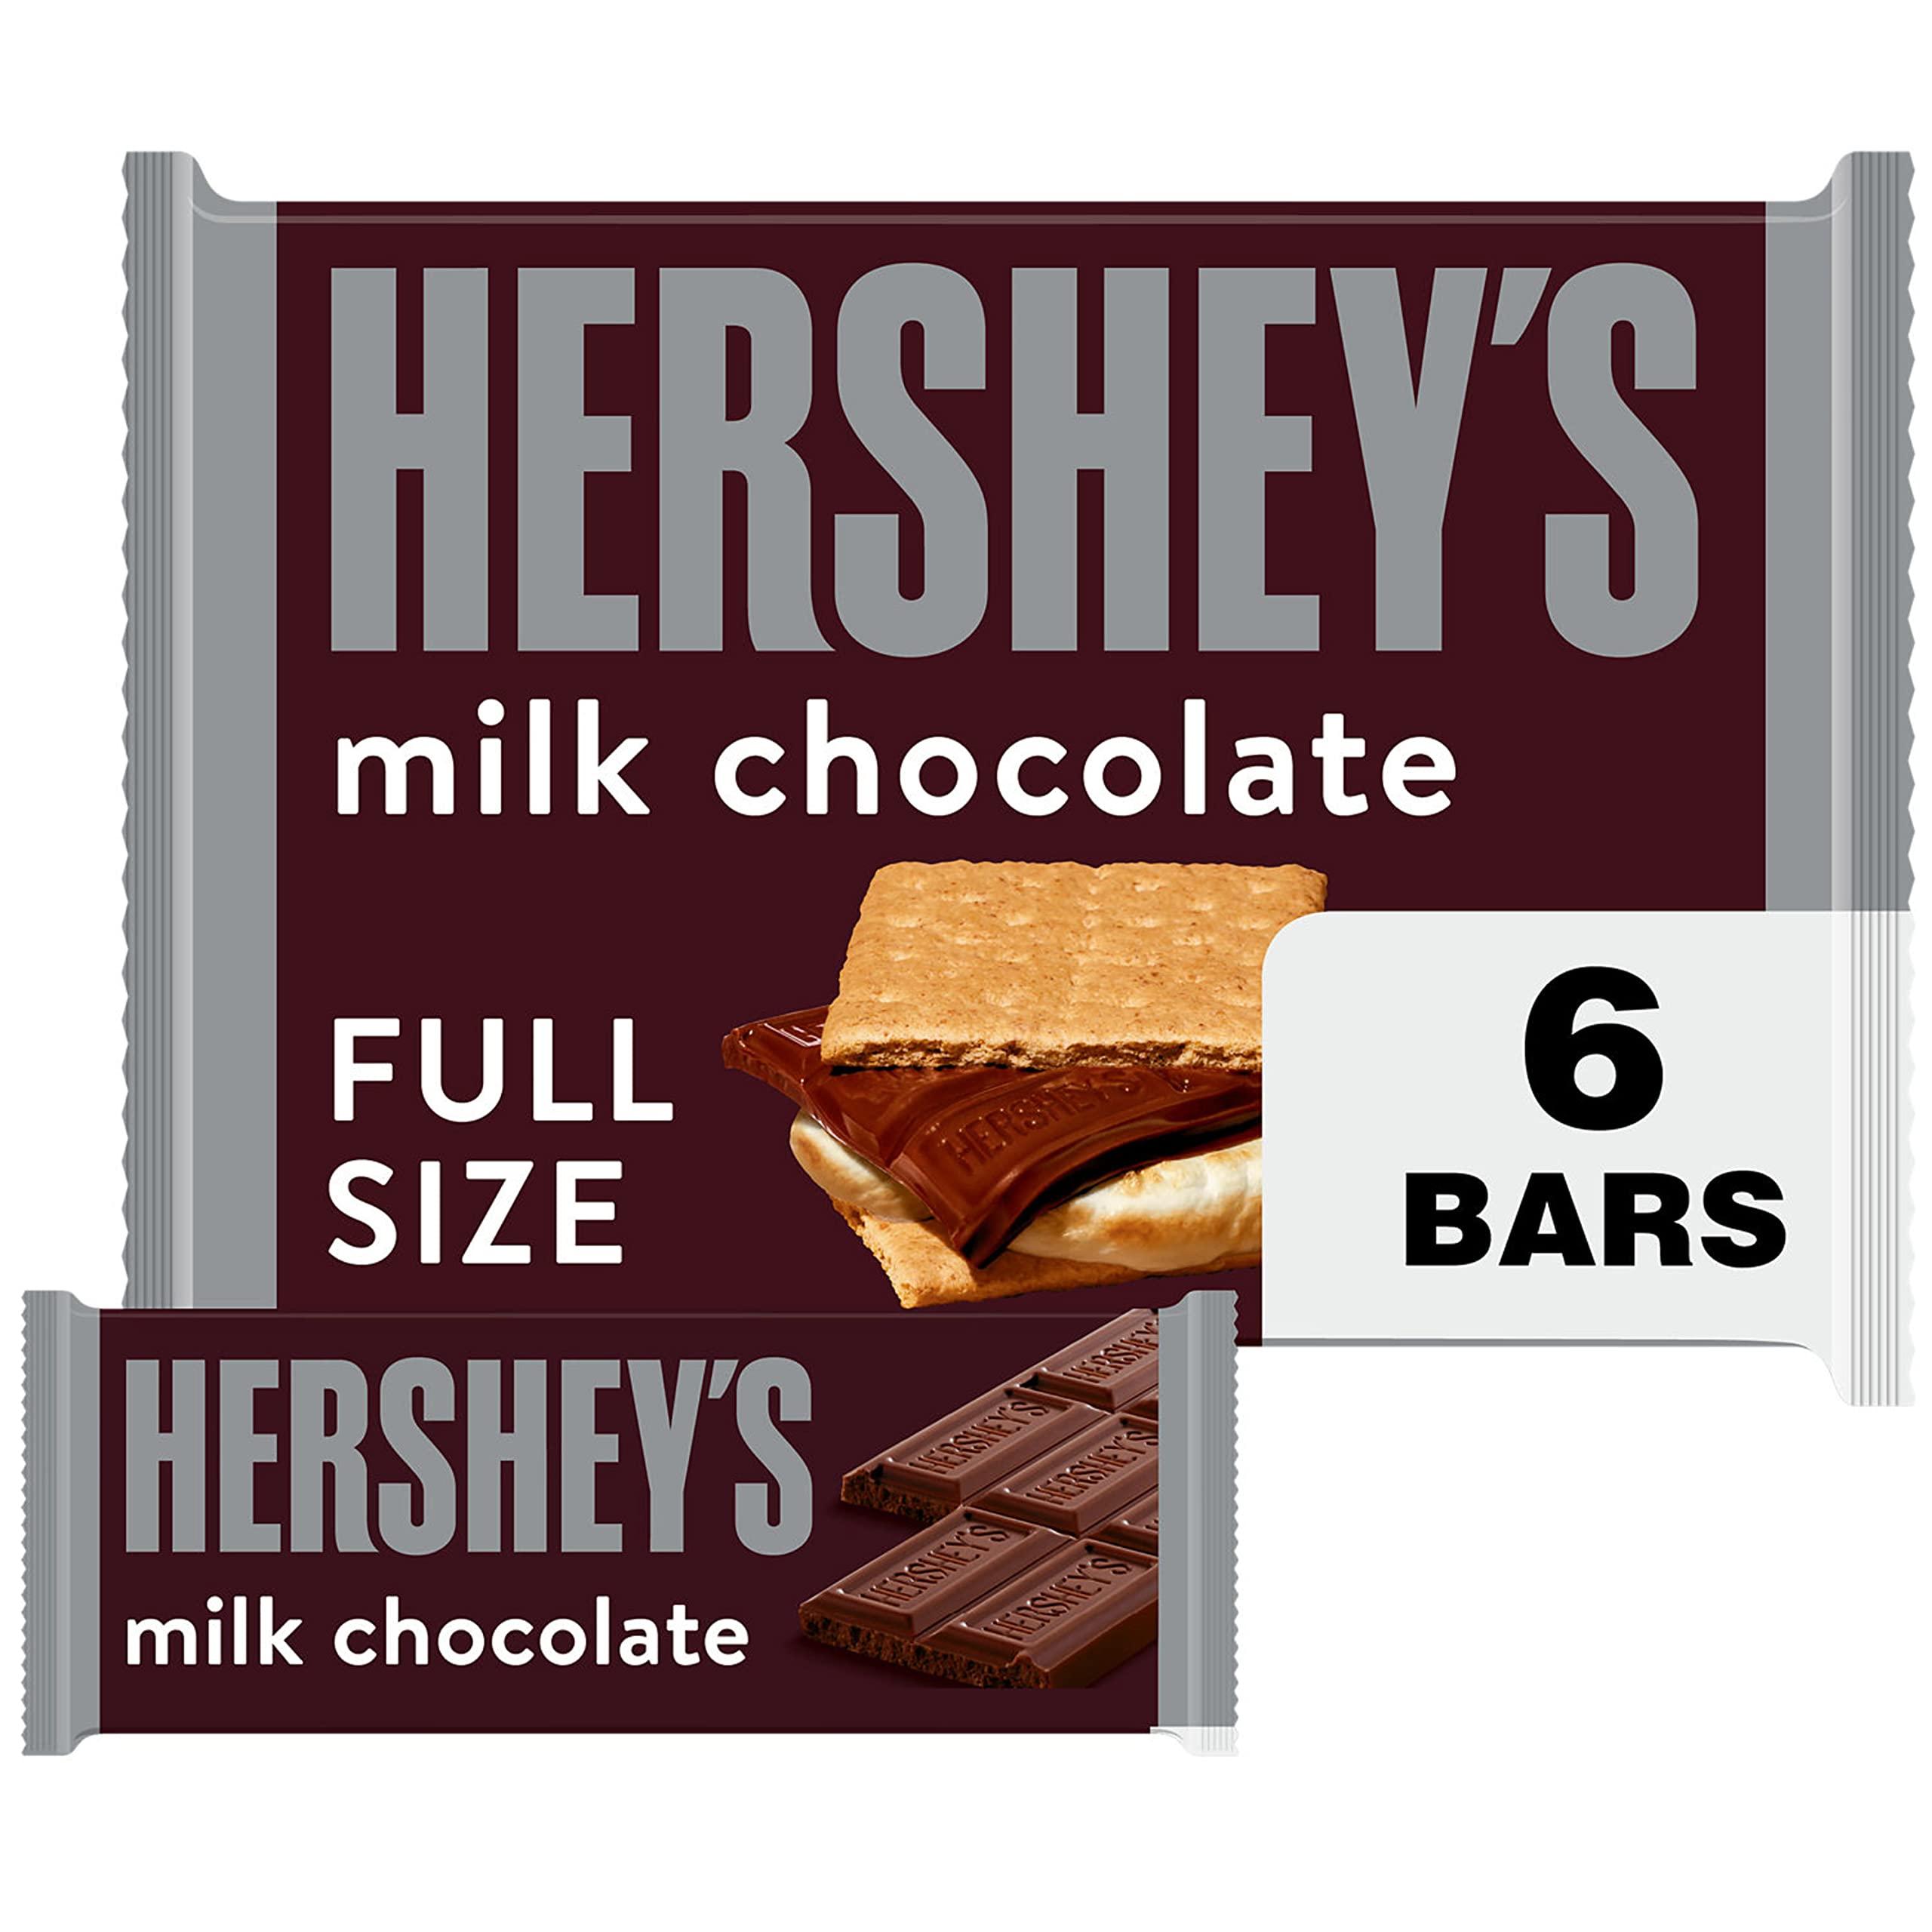 HERSHEY'S 6-Count Milk Chocolate Full Size Candy Bars, 1.55oz $4.22